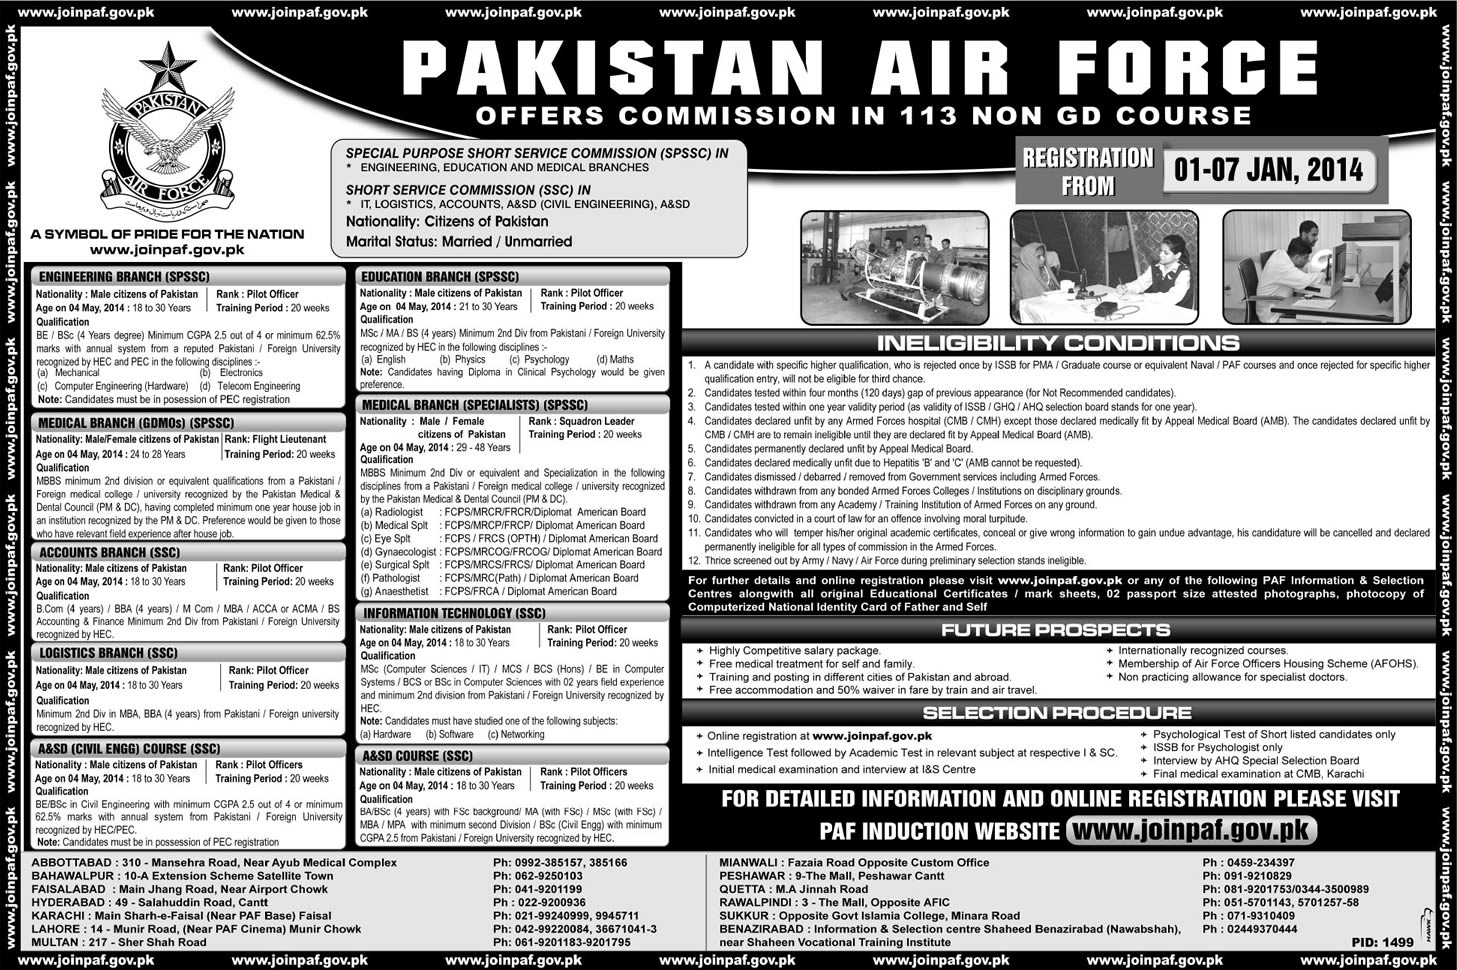 Pakistan Air Force Commission in 113 Non GD Course 2014 January - December 2013